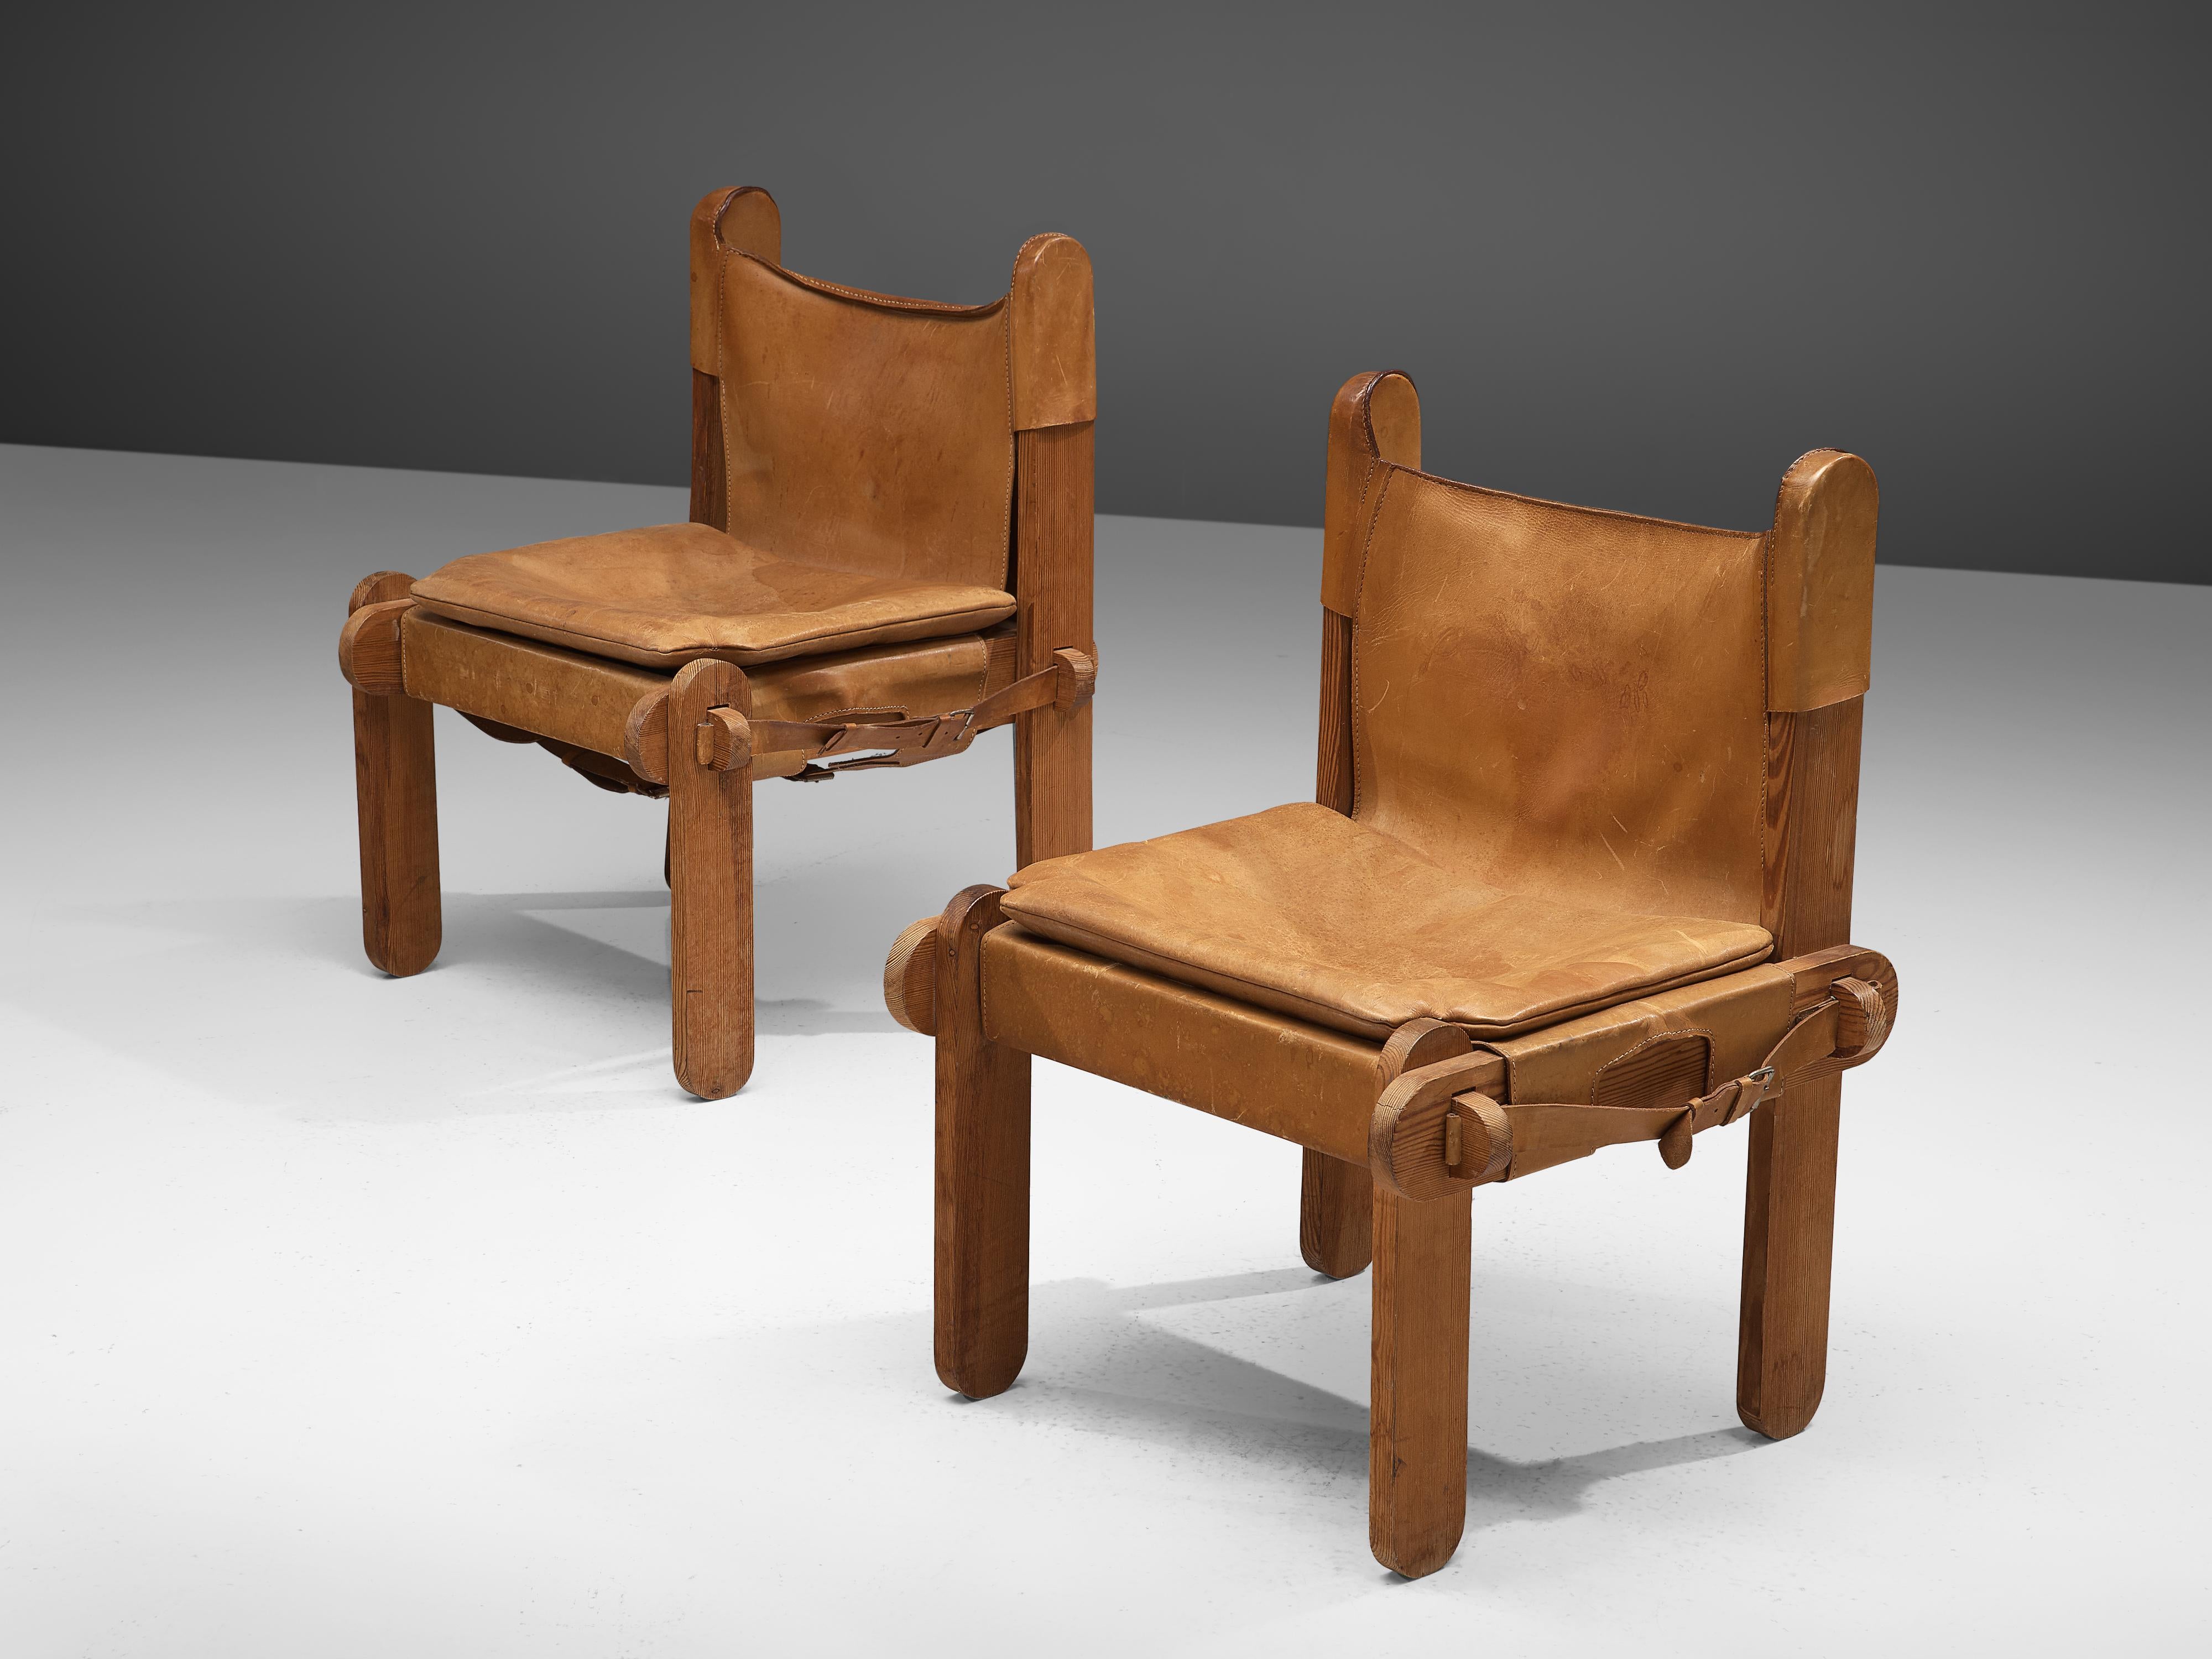 Side chairs, leather, pine, France, 1950s

These chairs are characterized by the patinated cognac leather that is adjusted to the wooden frame consisting of wooden slats with round ends. The warm colored leather is attached to the frame by straps